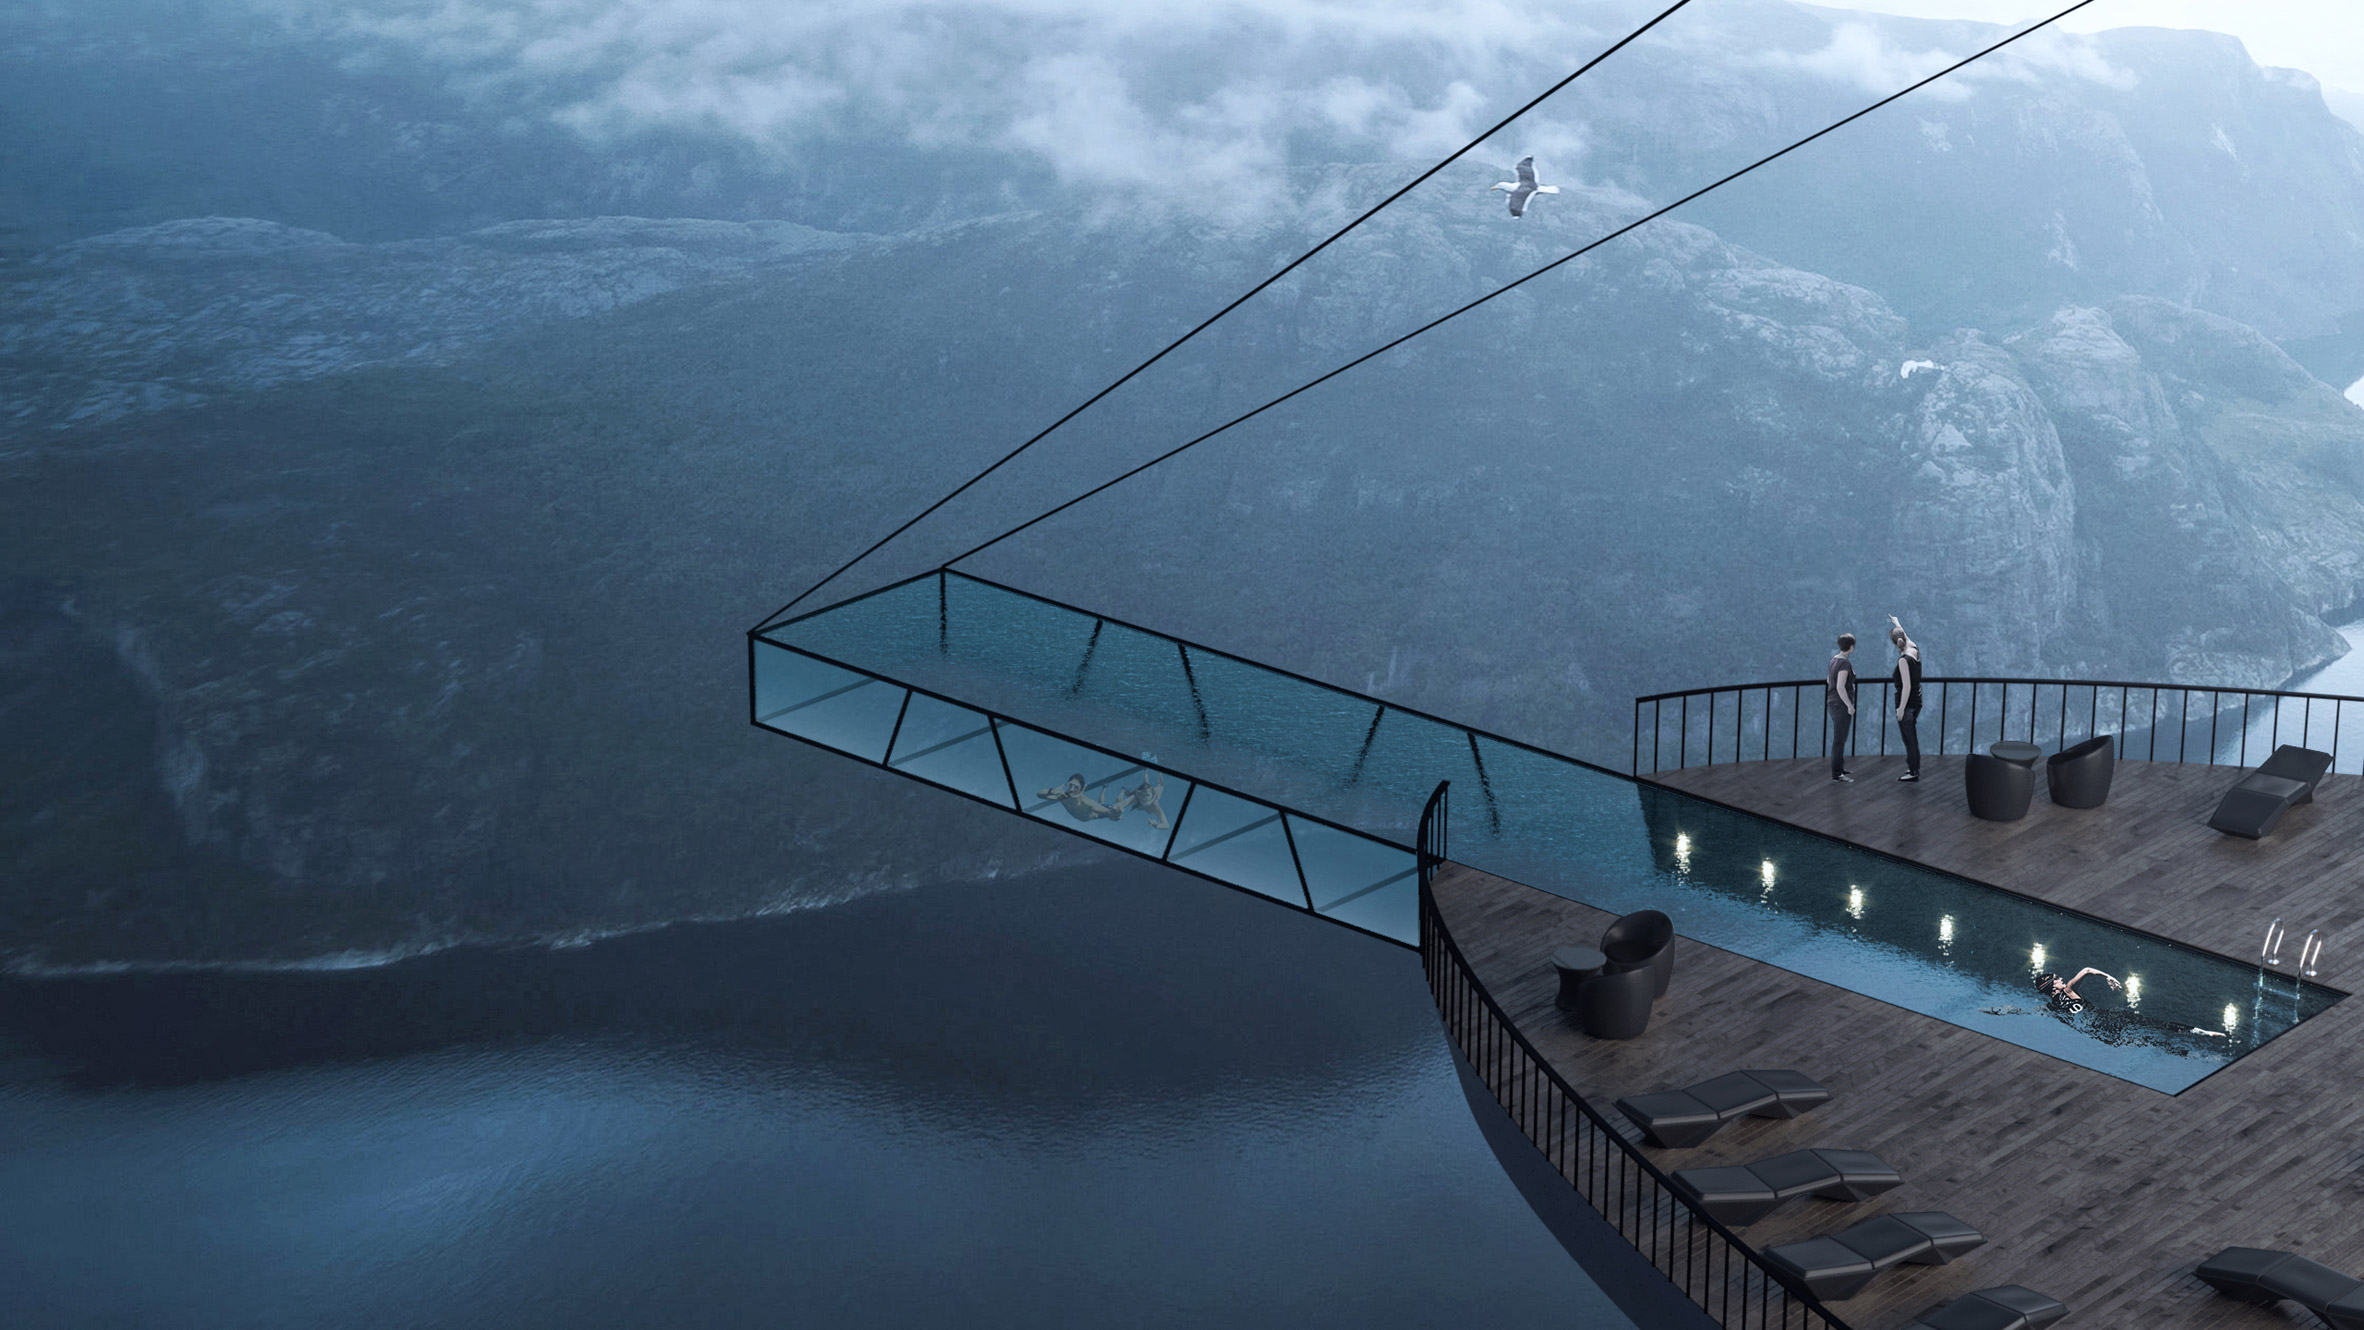 Cliff Concept Boutique Hotel with cantilevered swimming pool by Hayri Atak Architectural Design Studio in Norway